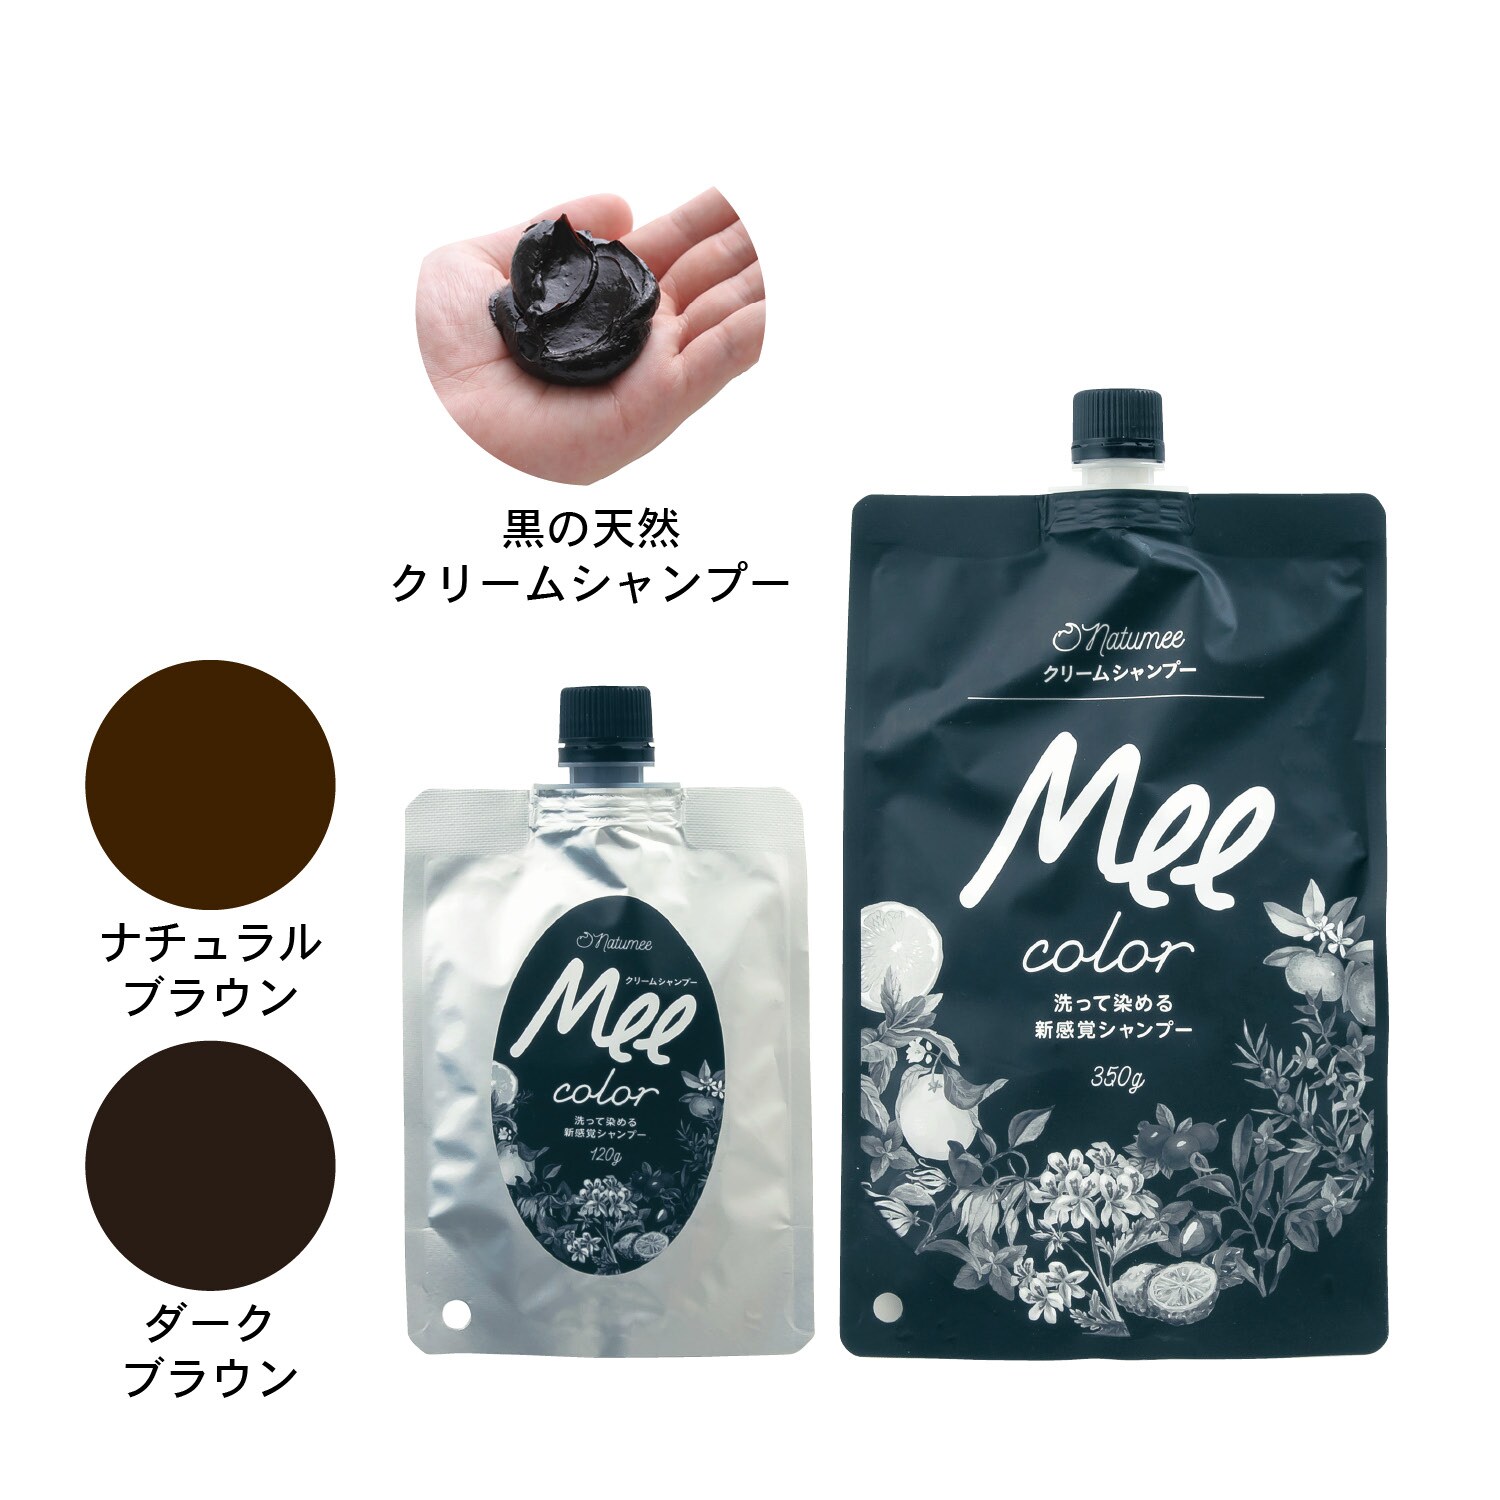 Mee color カラー ダークブラウン 350g 2個セット